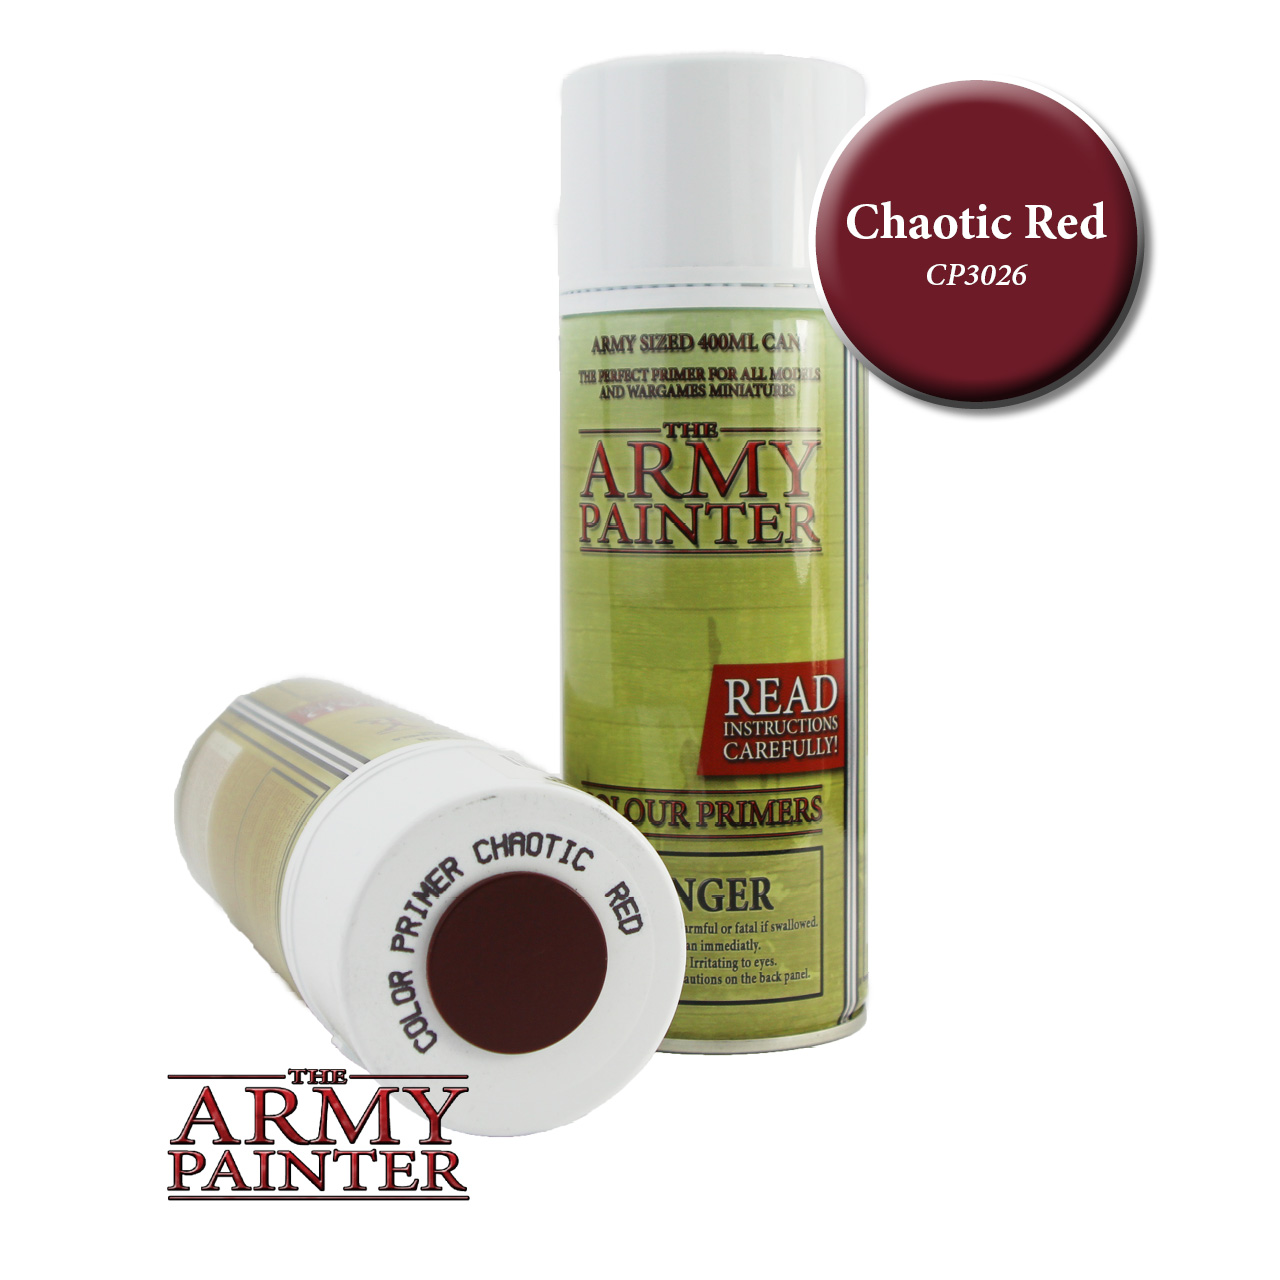 43026 CP3026S ARMY PAINTER SPRAY CHAOTIC RED